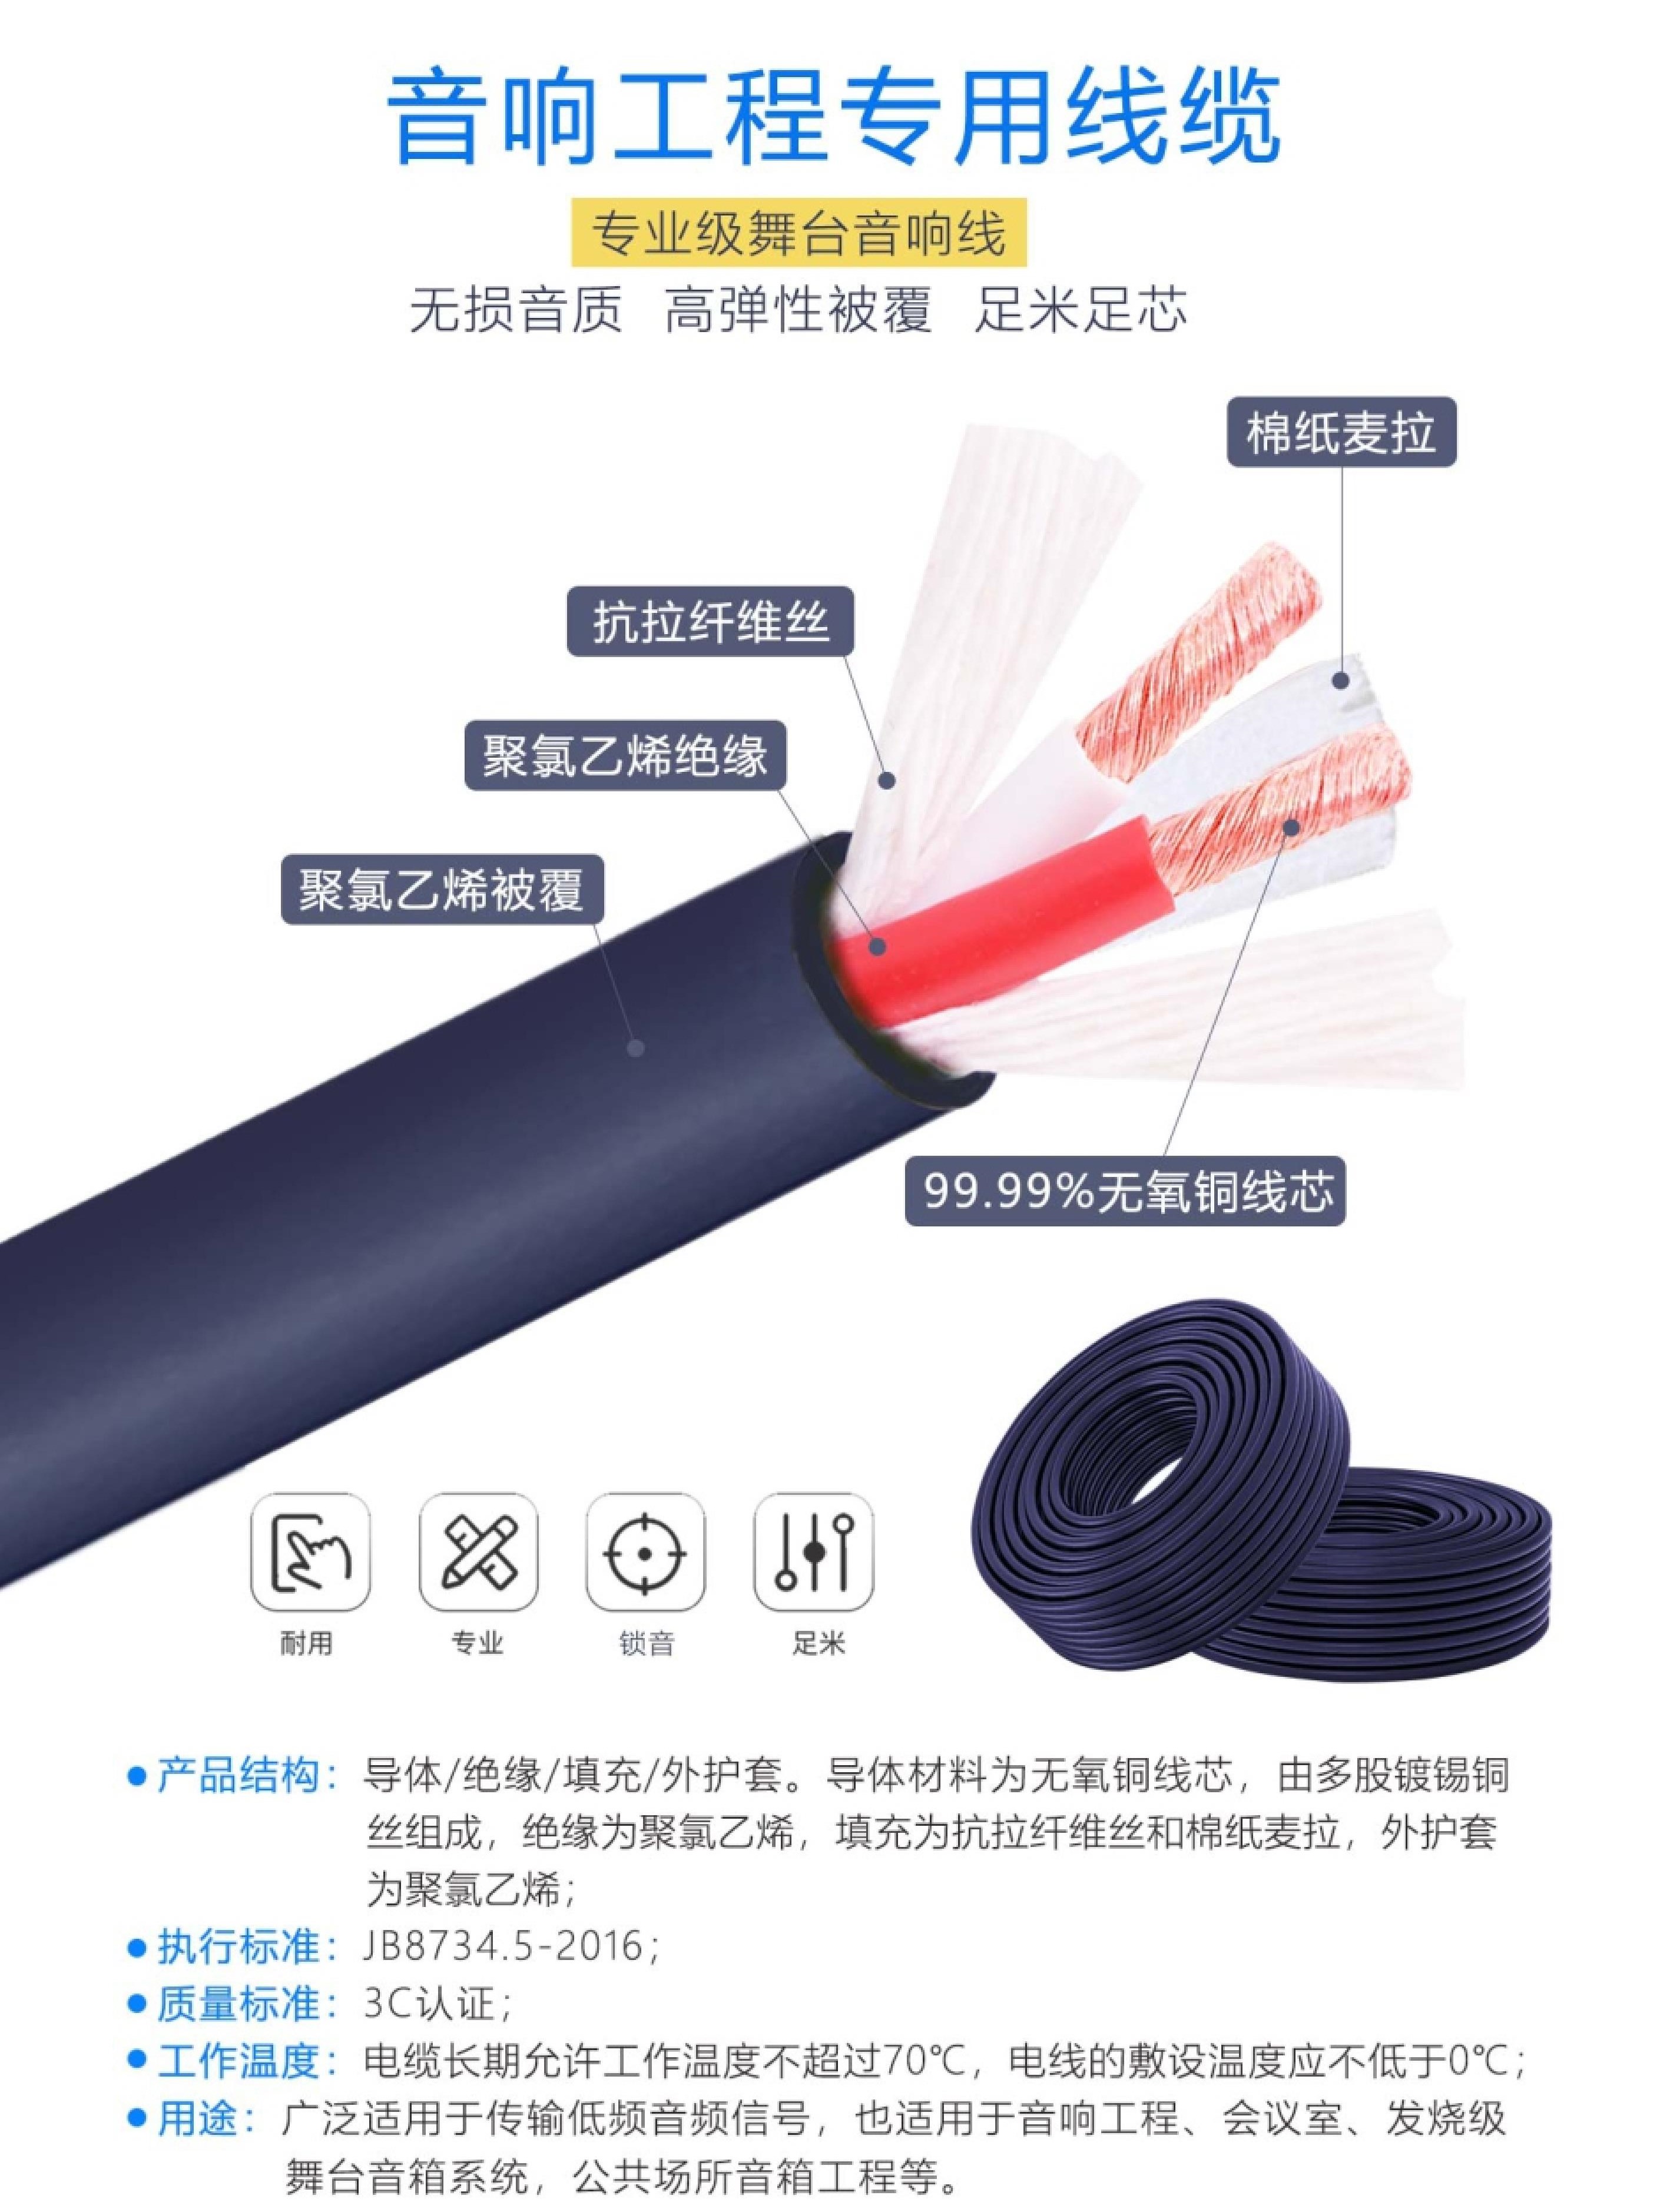 RVSH Power cable